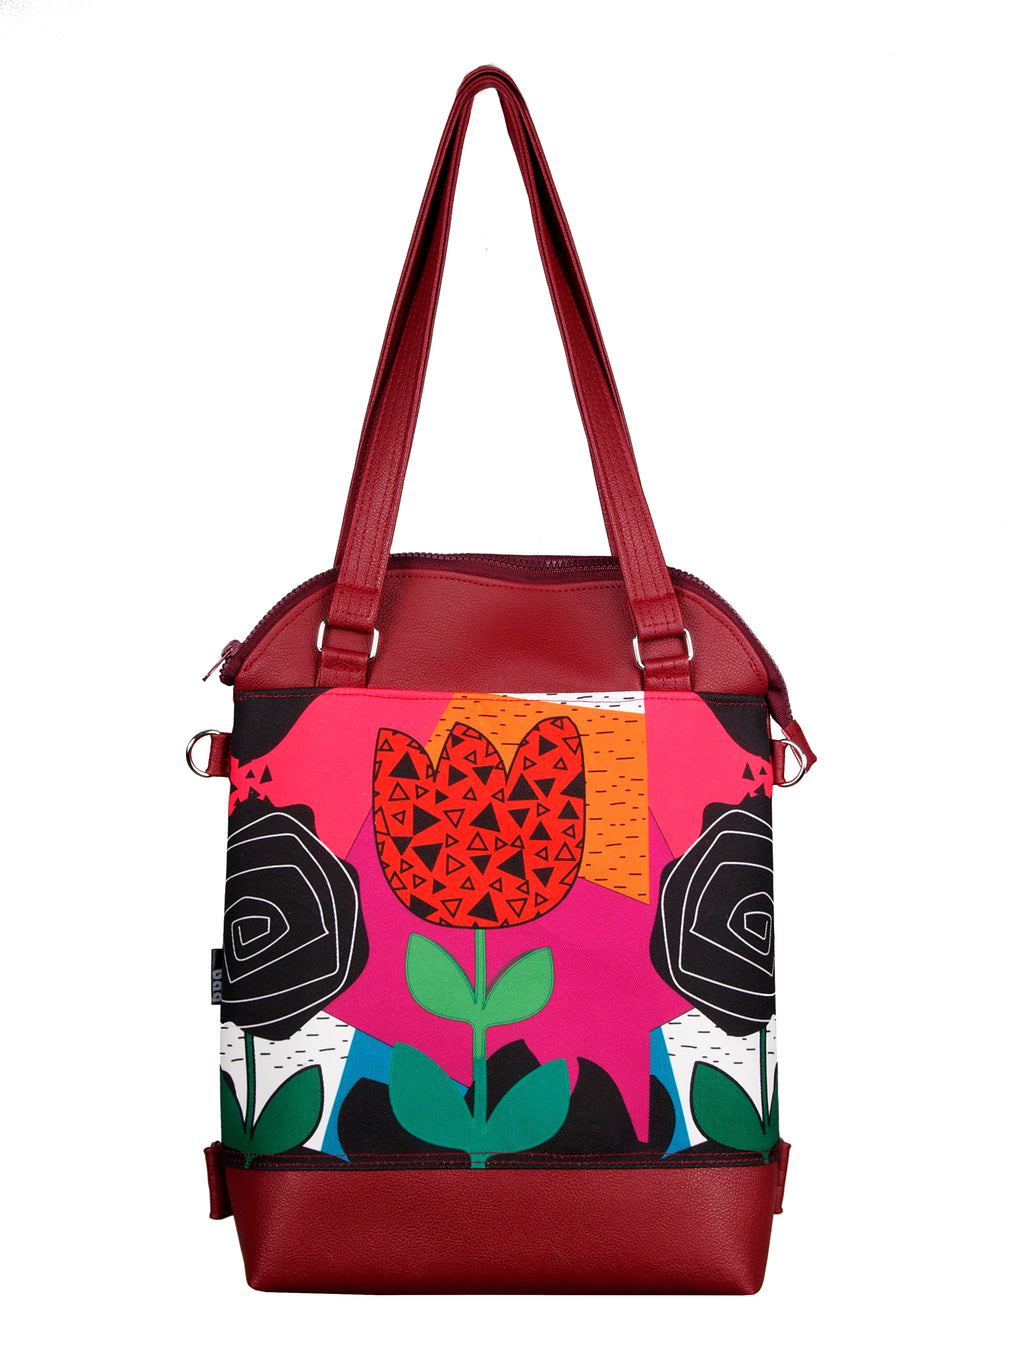 Bardo classic bag and backpack - Colorful emotion - Premium  from BARDO ART WORKS - Just lv89.00! Shop now at BARDO ART WORKS